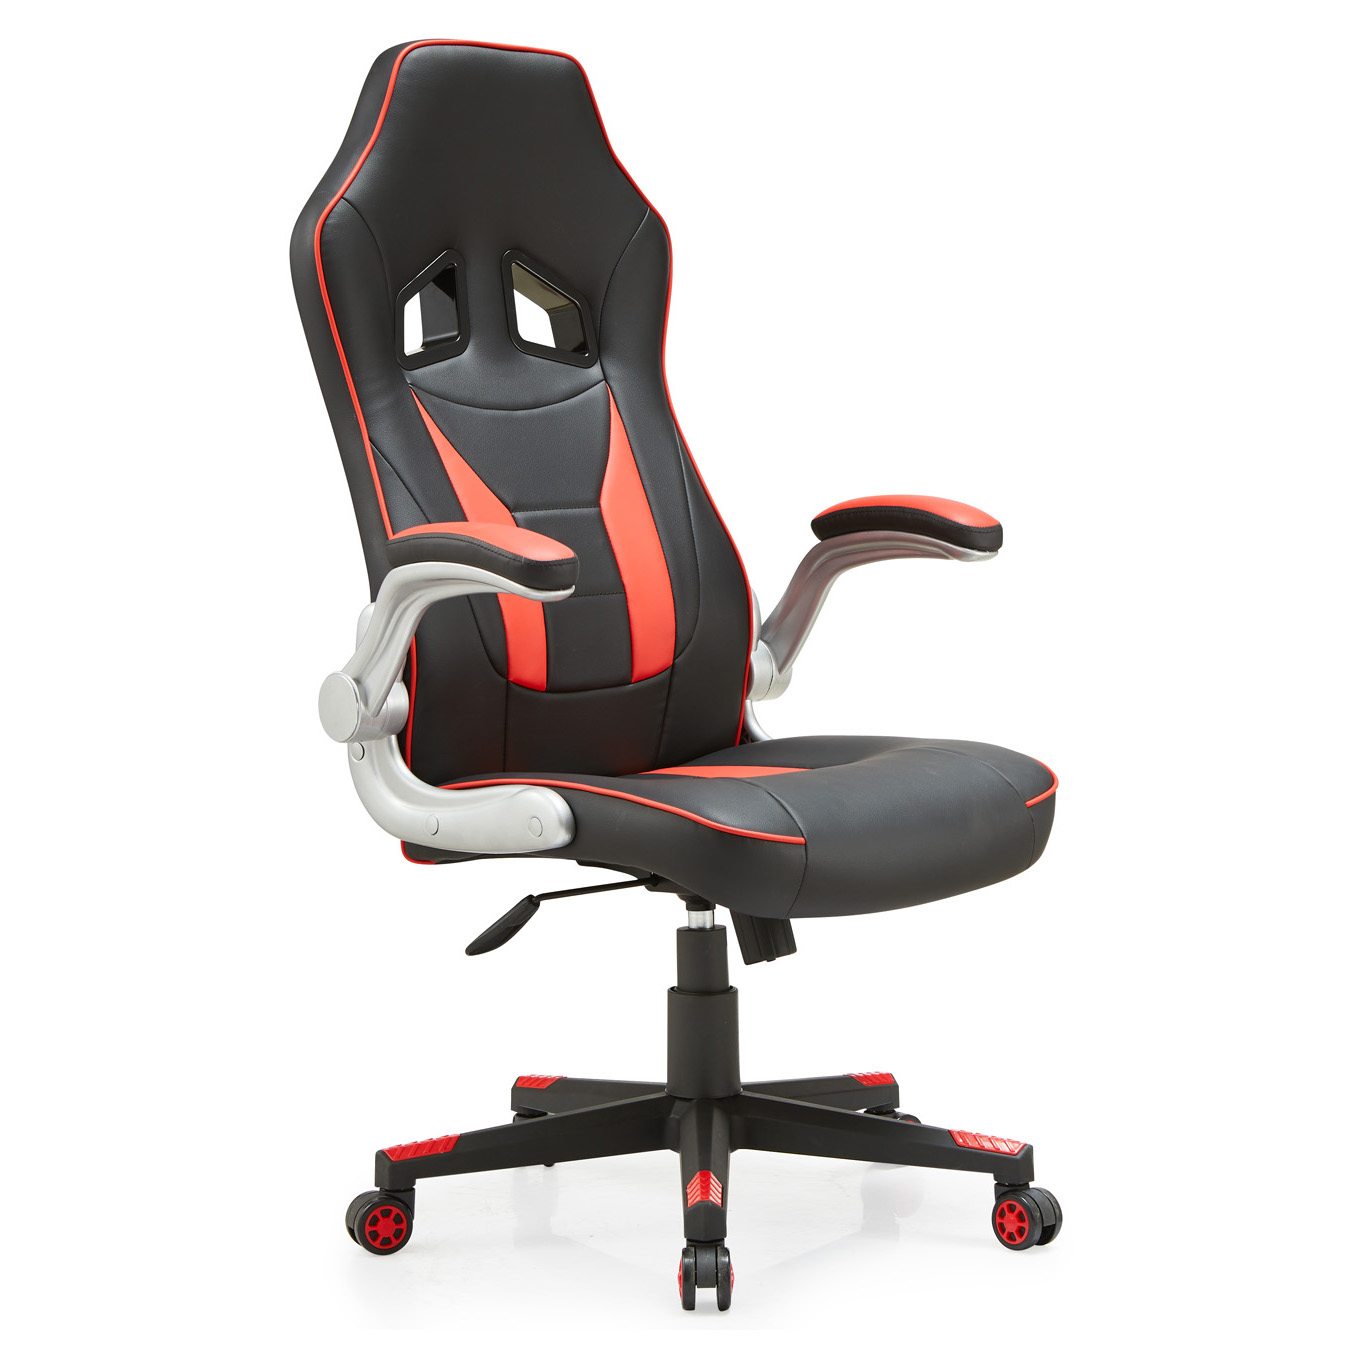 Razer Iskur V2 Gaming Chair Review - Lumbar Support Done Right - PlayStation LifeStyle